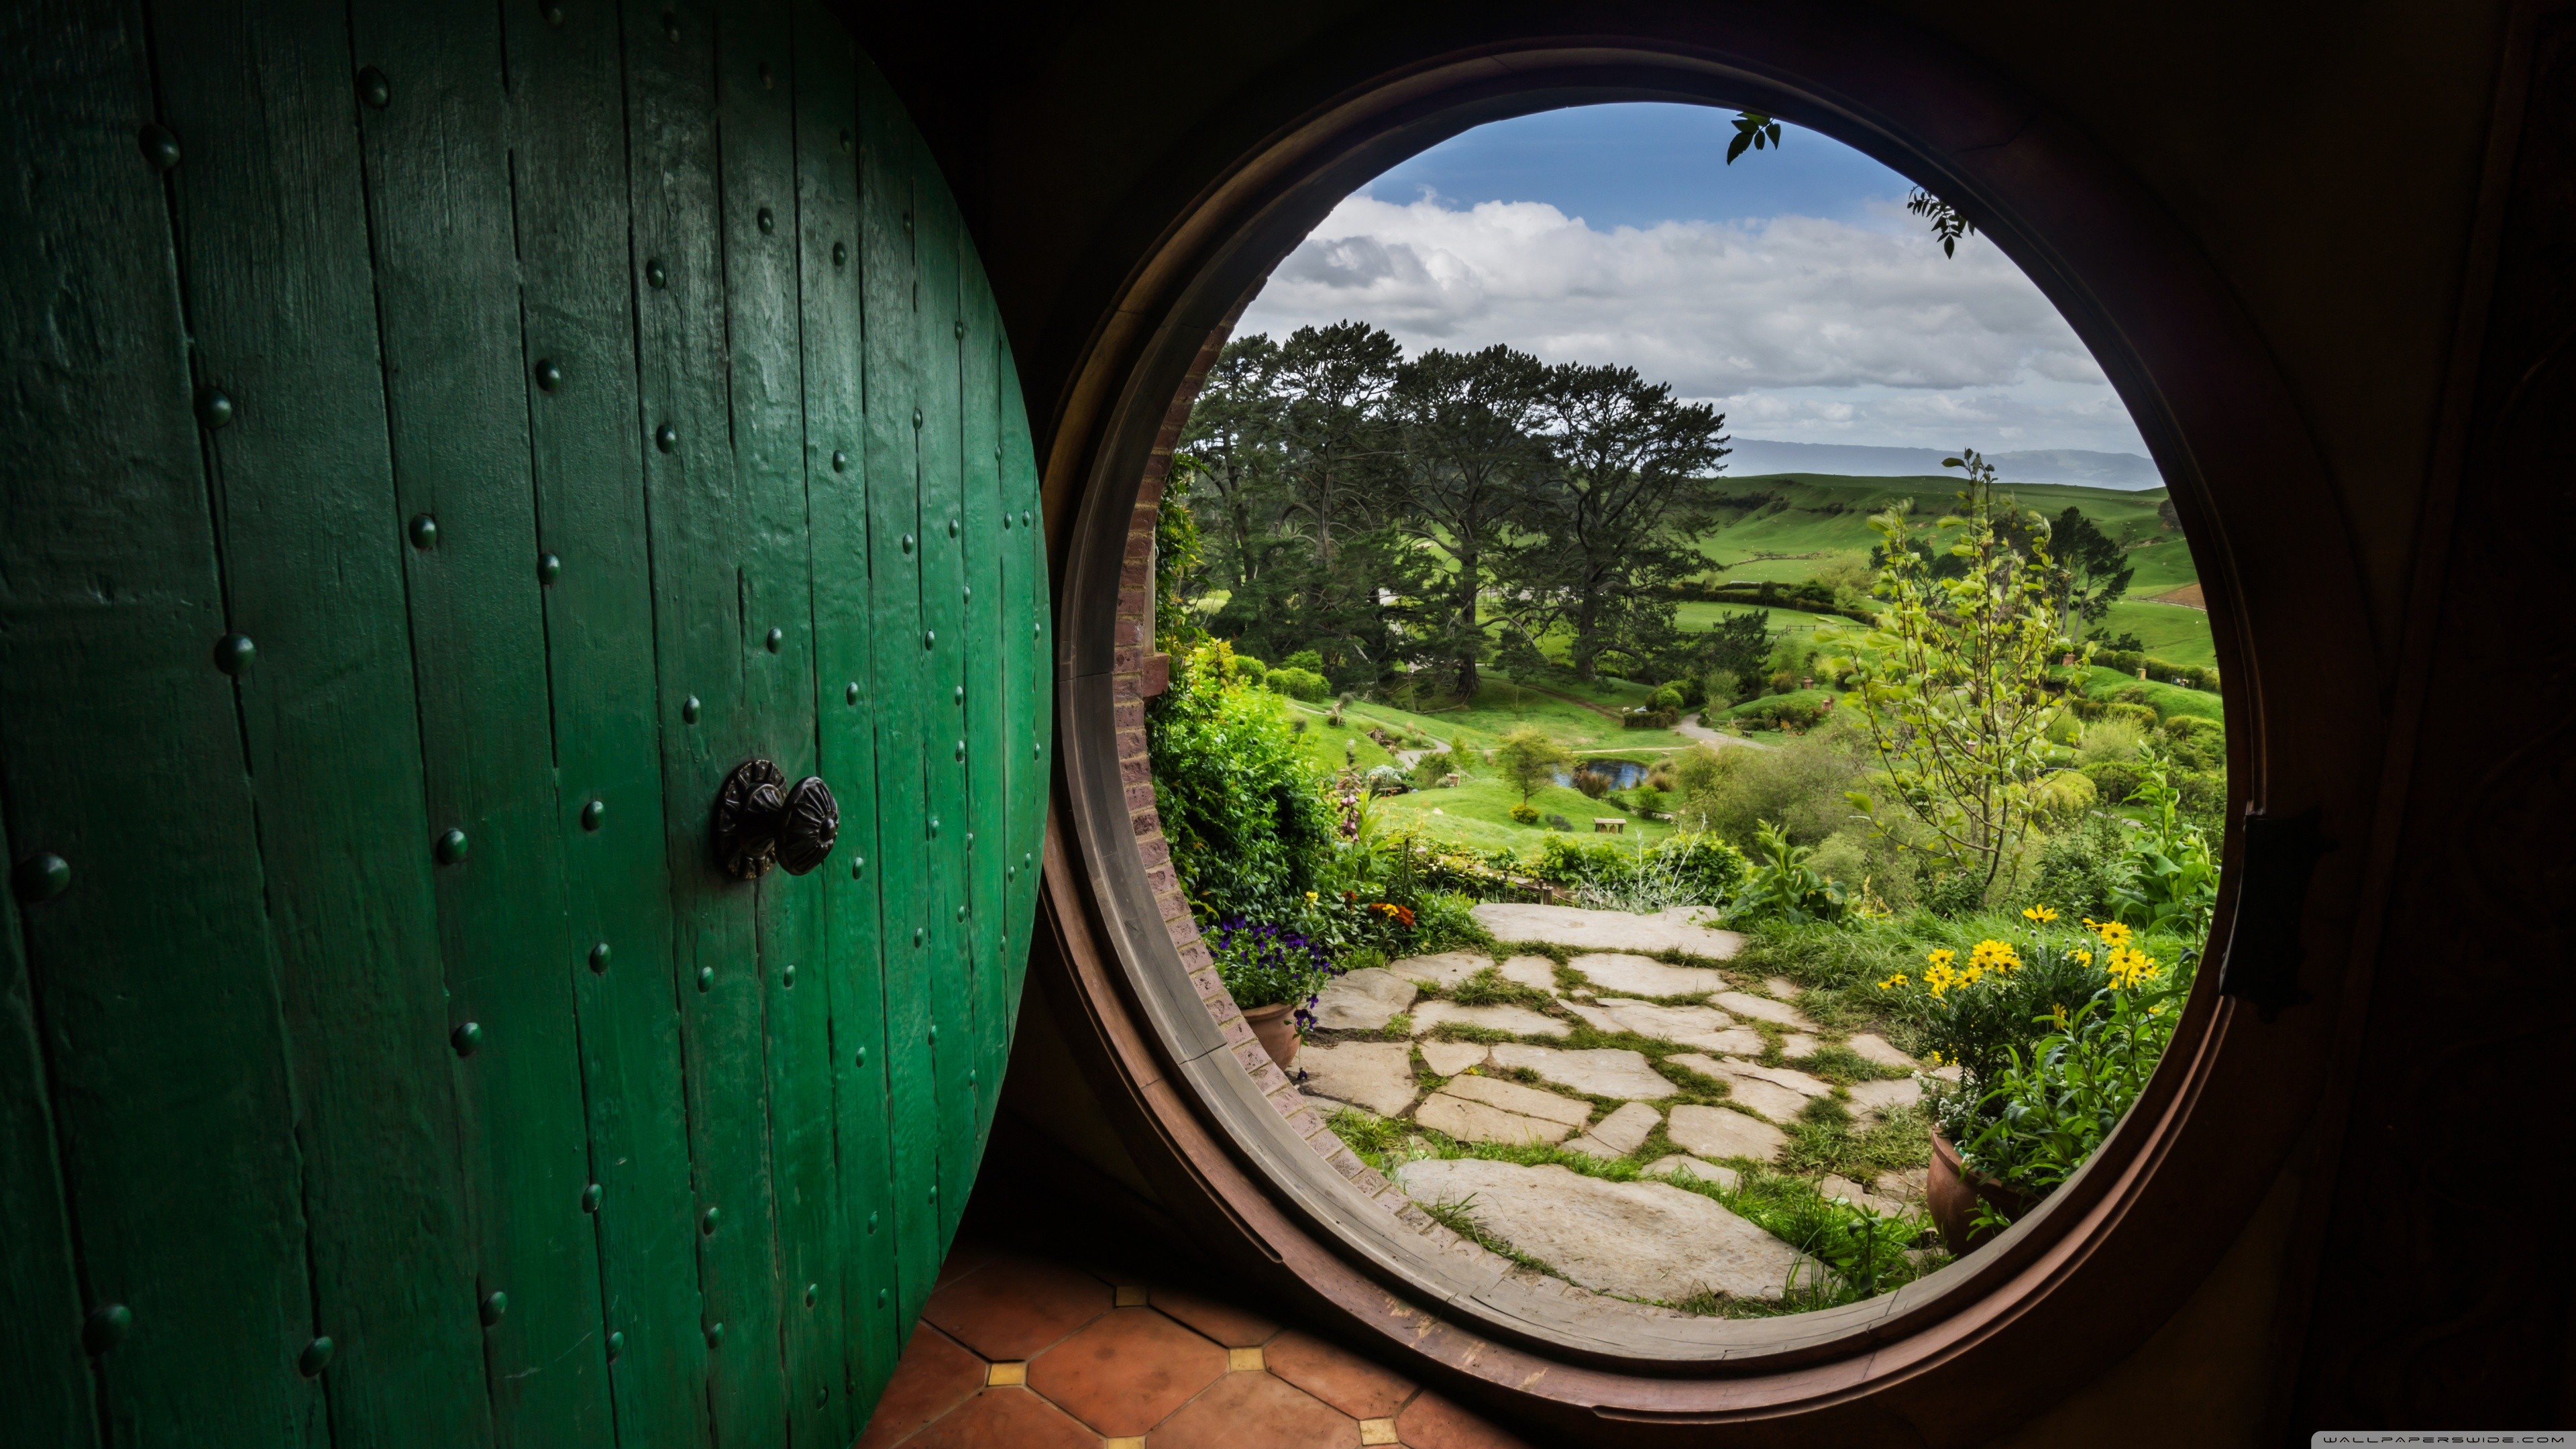 The Hobbit Bag End The Shire The Lord Of The Rings Bilbo Baggins Frodo Baggins House Hobbits Middle  3840x2160